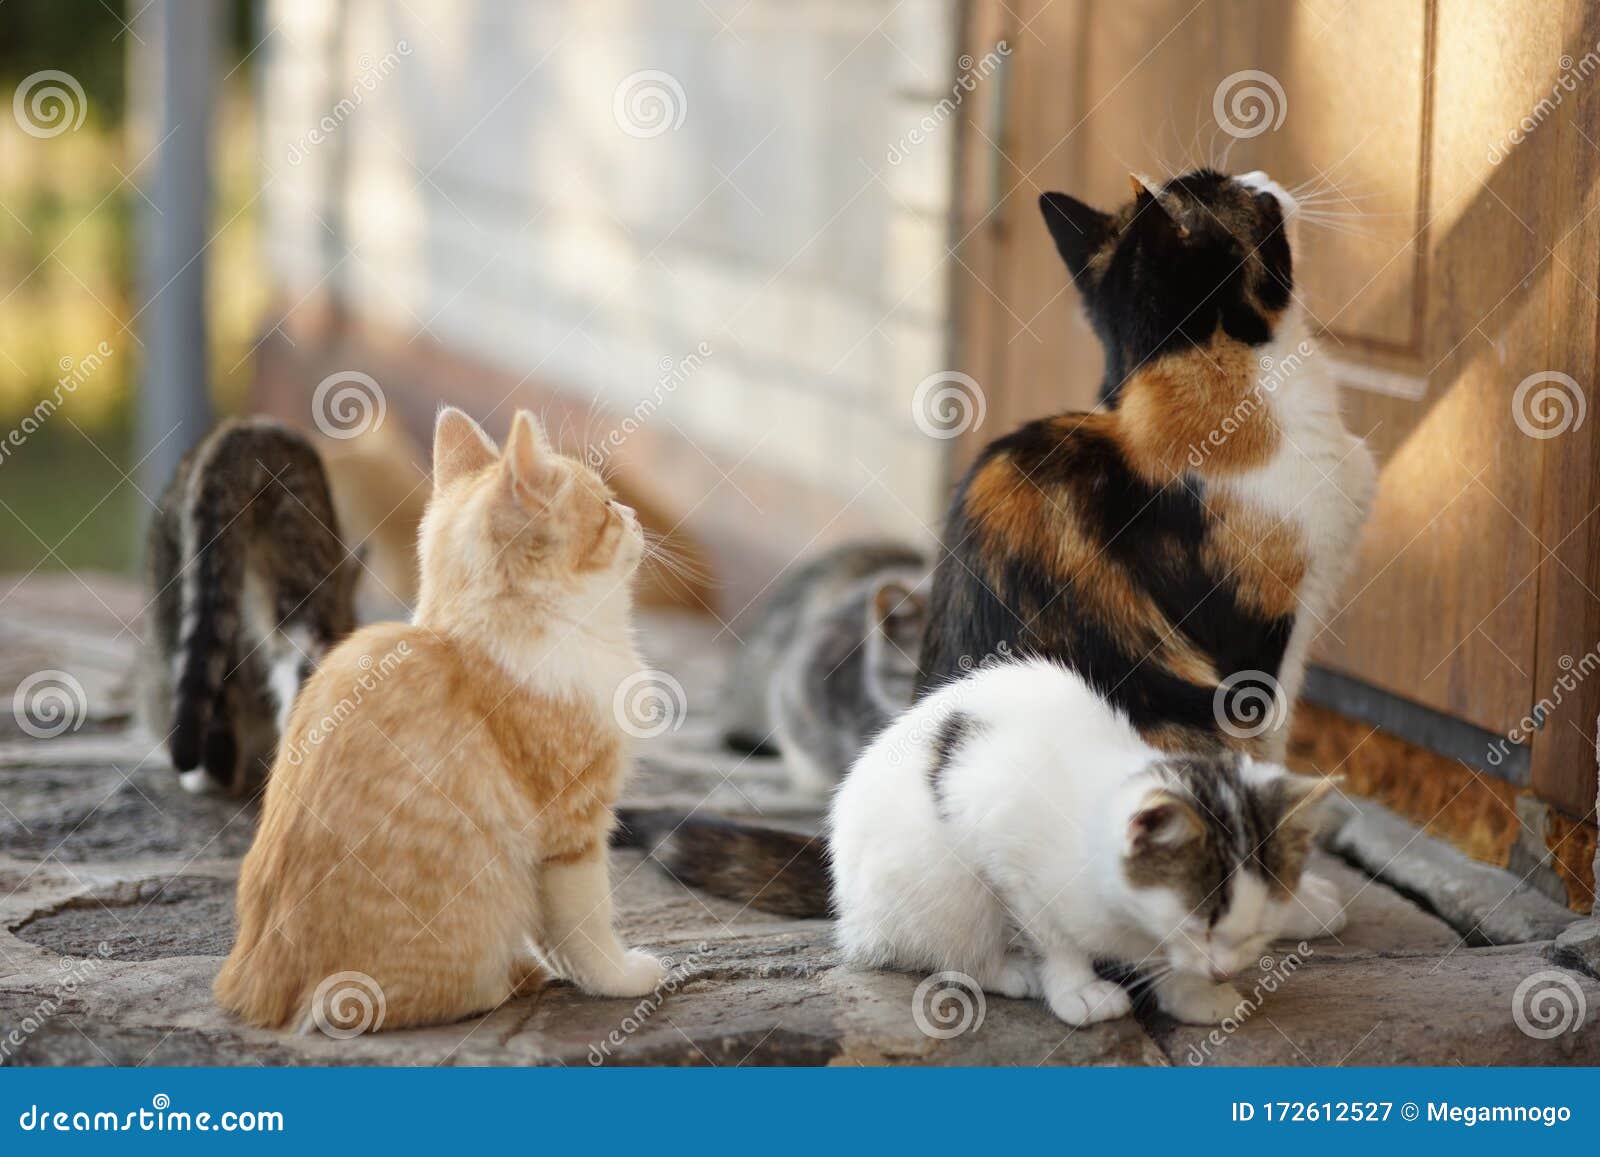 Cat Mom And Her Cute Kittens Sitting Outdoor Near Door Stock Image